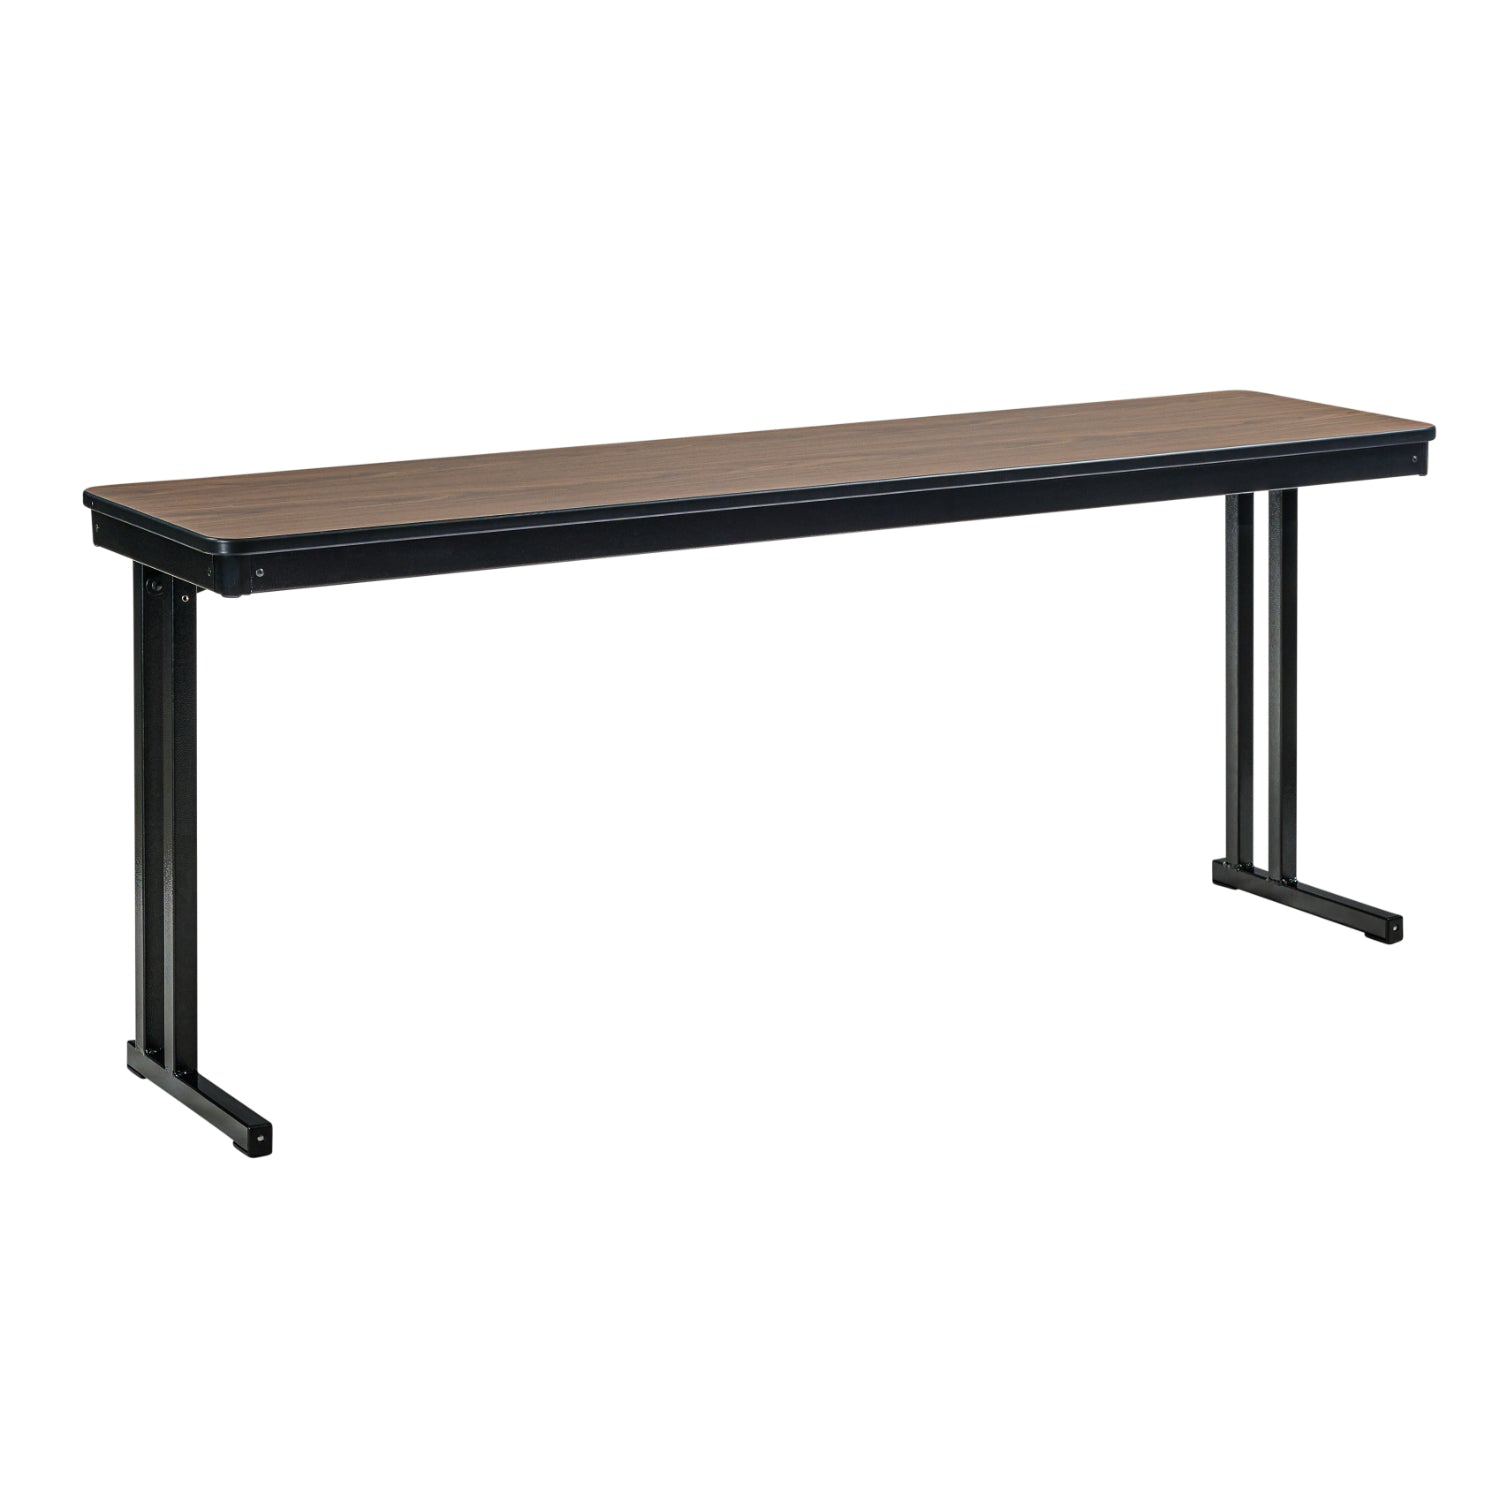 Max Seating Folding Training and Seminar Table with Cantilever Legs, 24" x 72", High Pressure Laminate Top with MDF Core/ProtectEdge